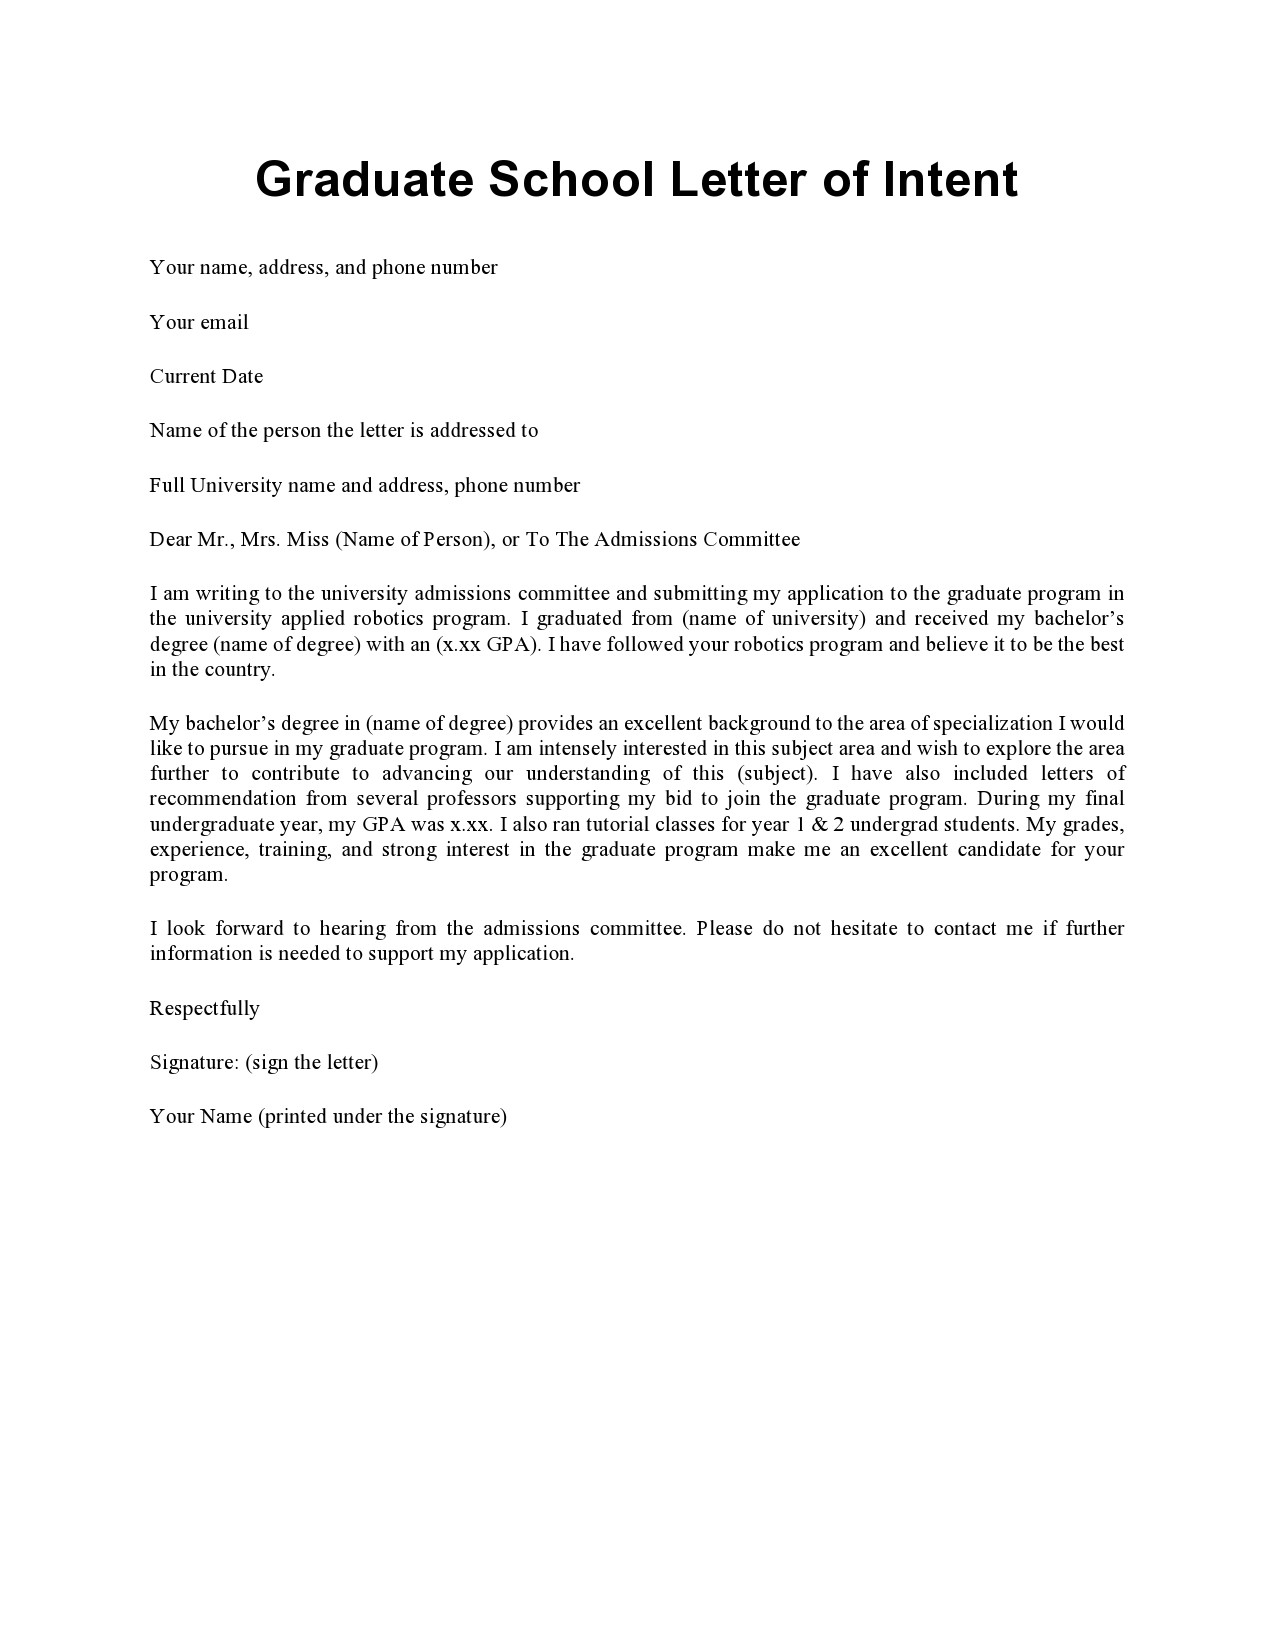 Free letter of intent for graduate school 11